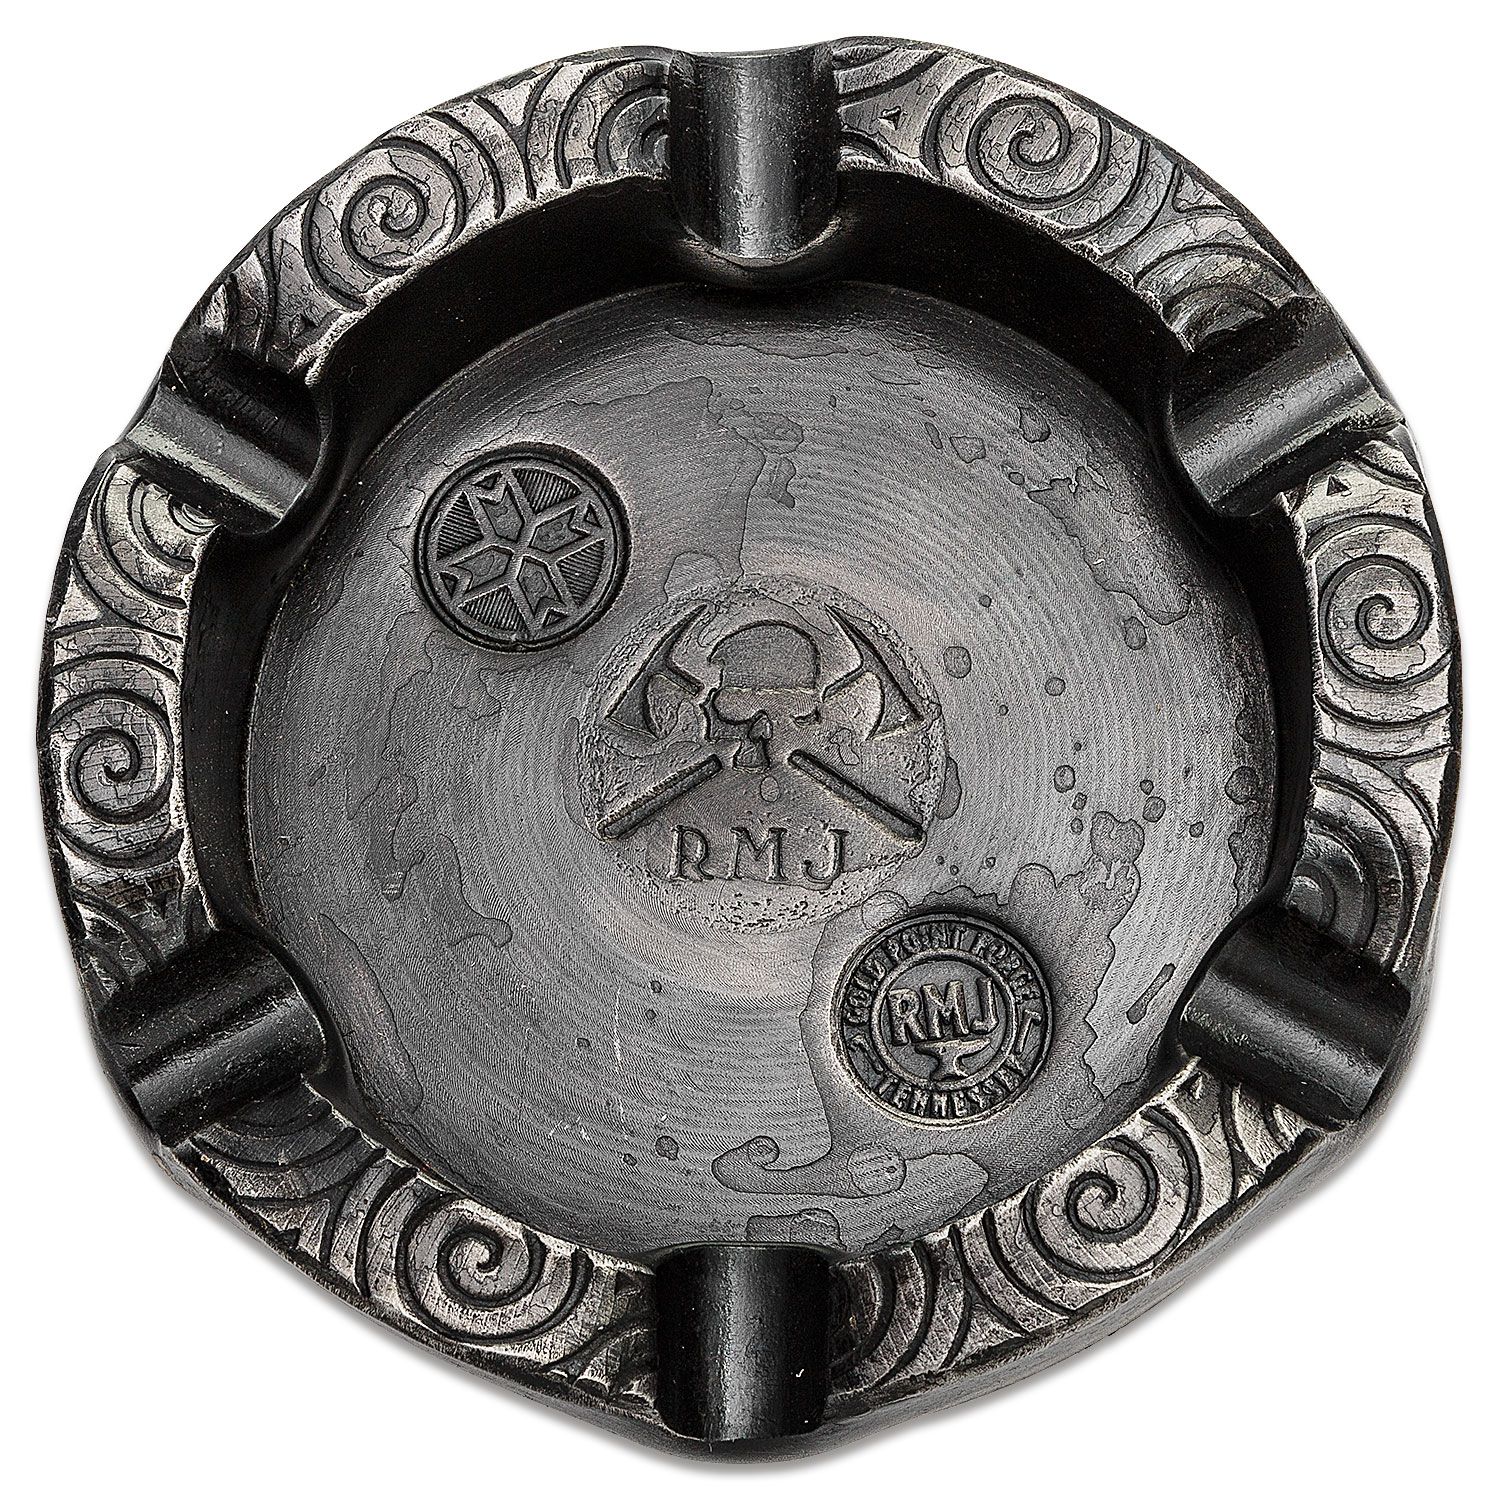 Forged Catacombs Ashtray – Explore More